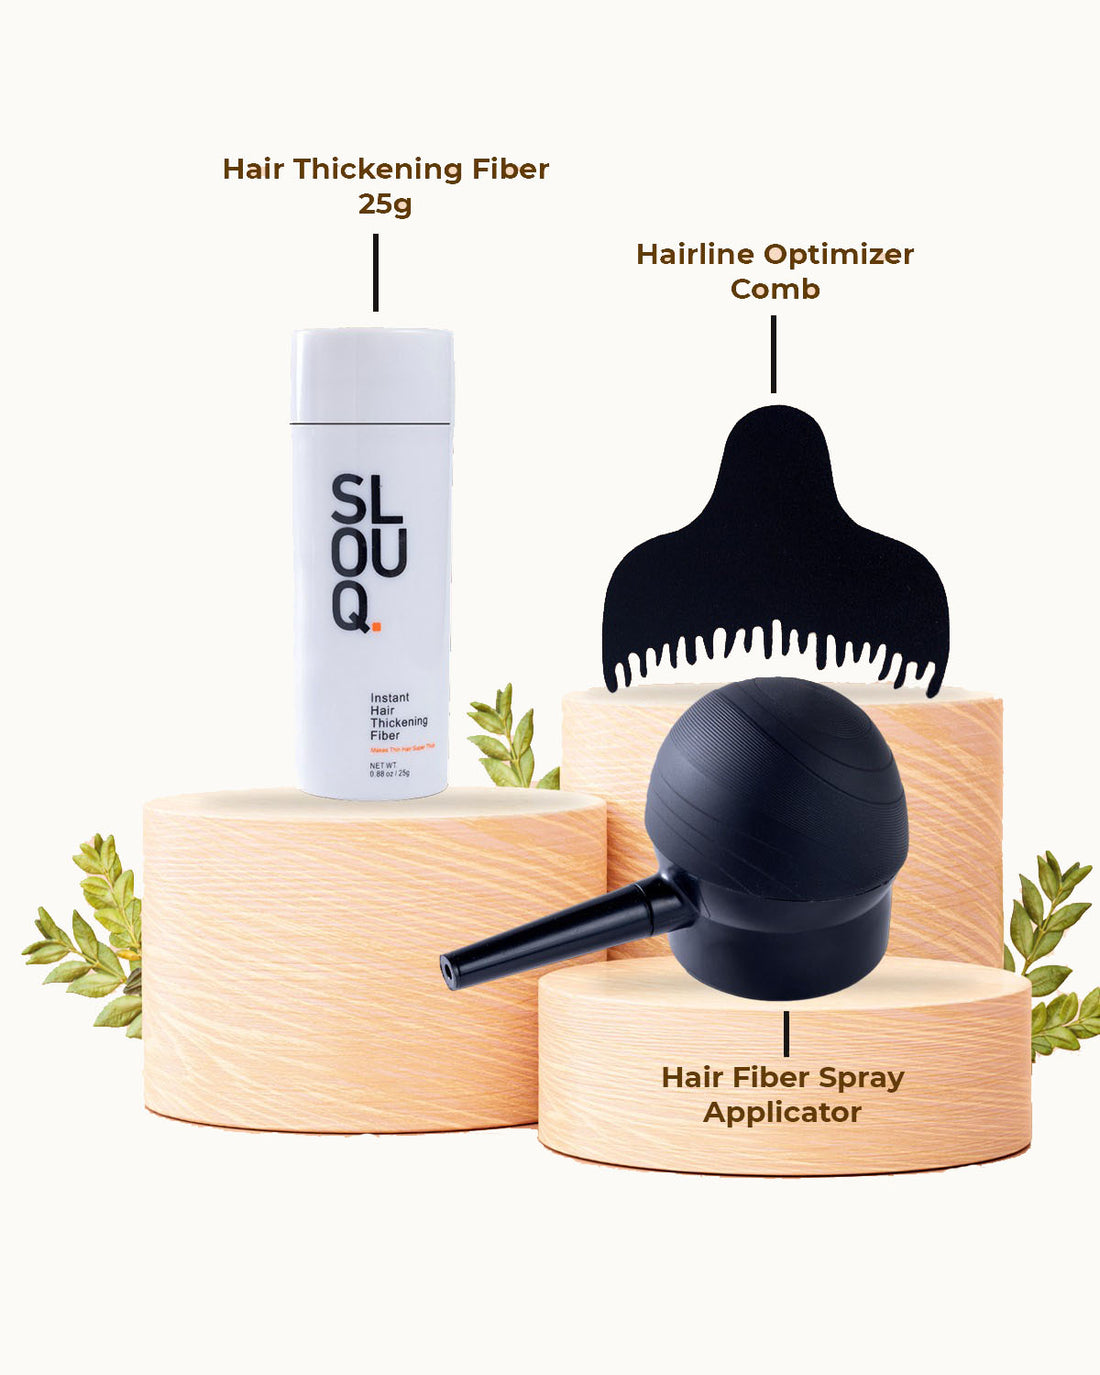 Hair Thickening Fiber Kit with Spray Applicator and Hairline Comb